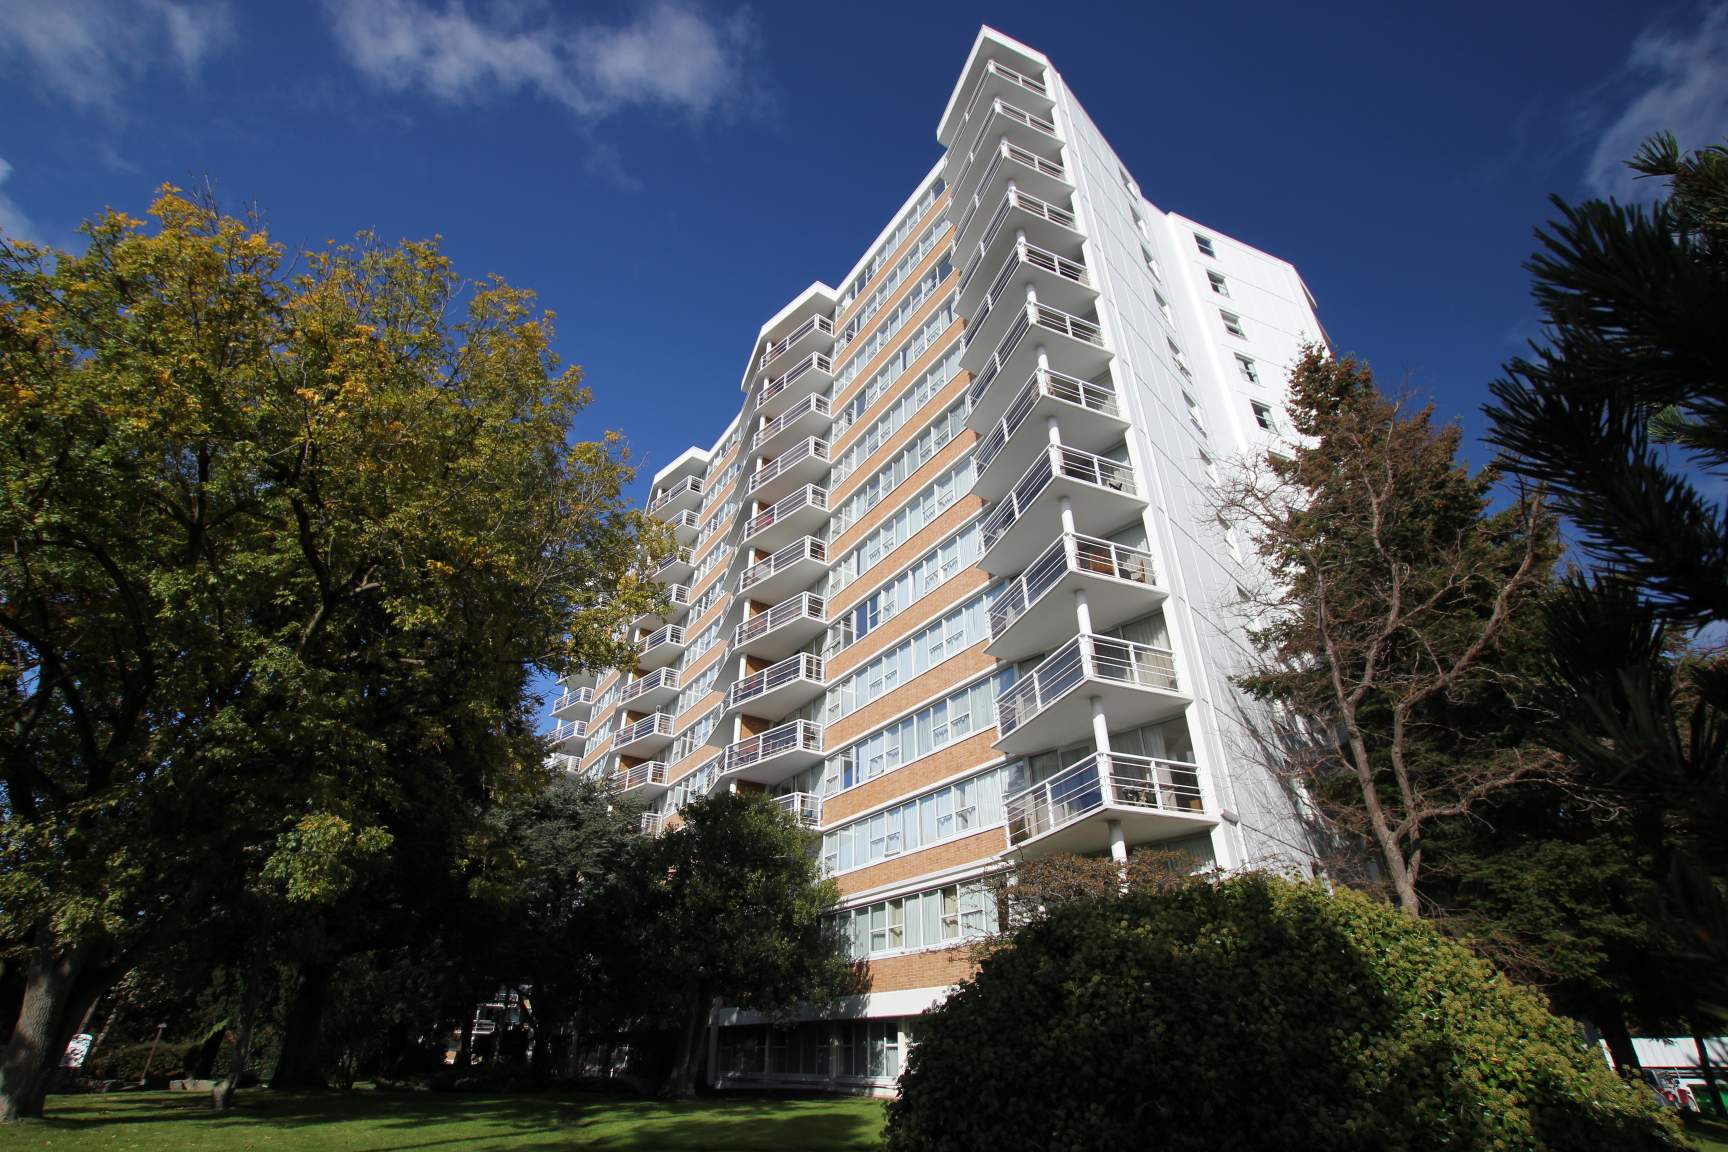 1 bedroom Apartments for rent in Victoria at Lord Simcoe - Photo 01 - RentersPages – L412329